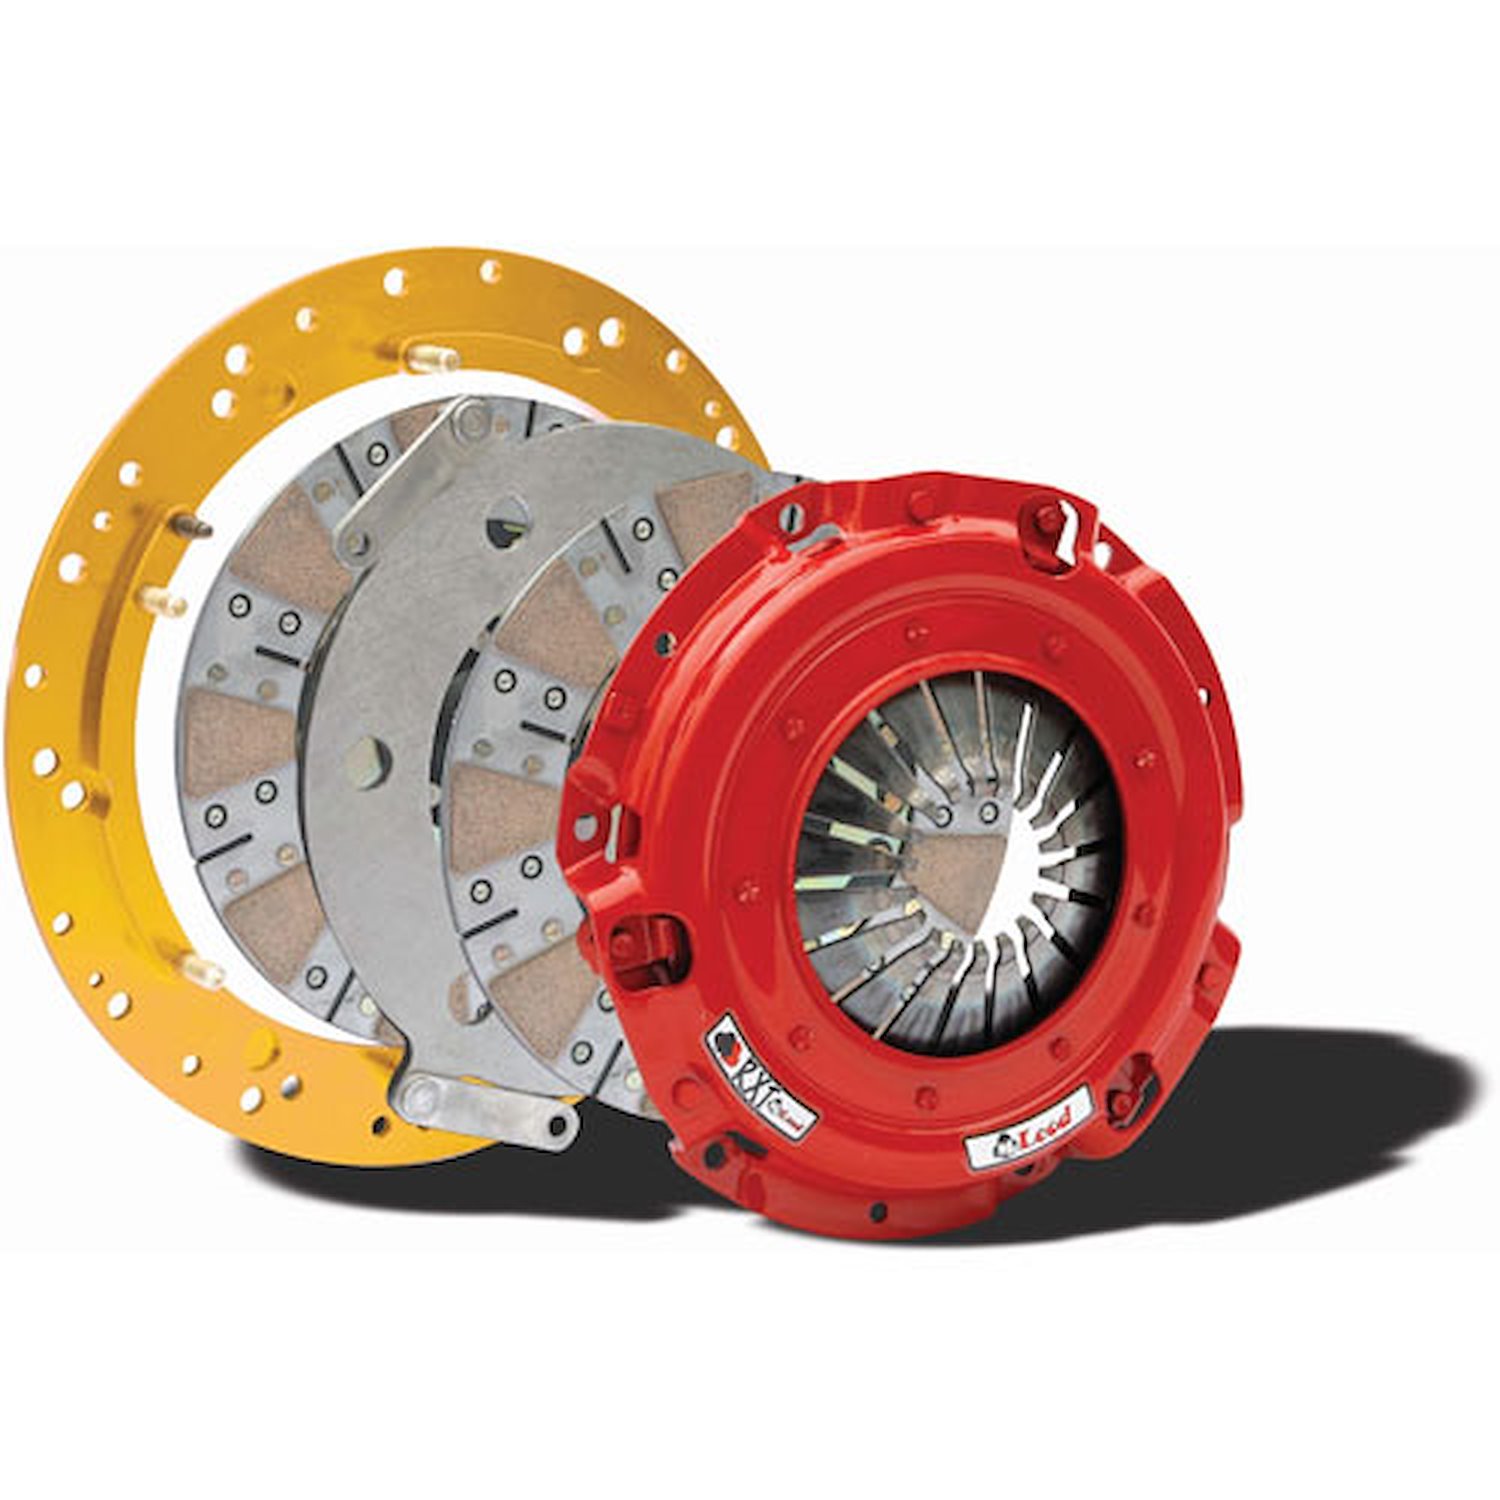 The RXT 1200 Twin Disc Clutch is capable of handling up to 1200 HP while still maintaining a stock pedal feel.